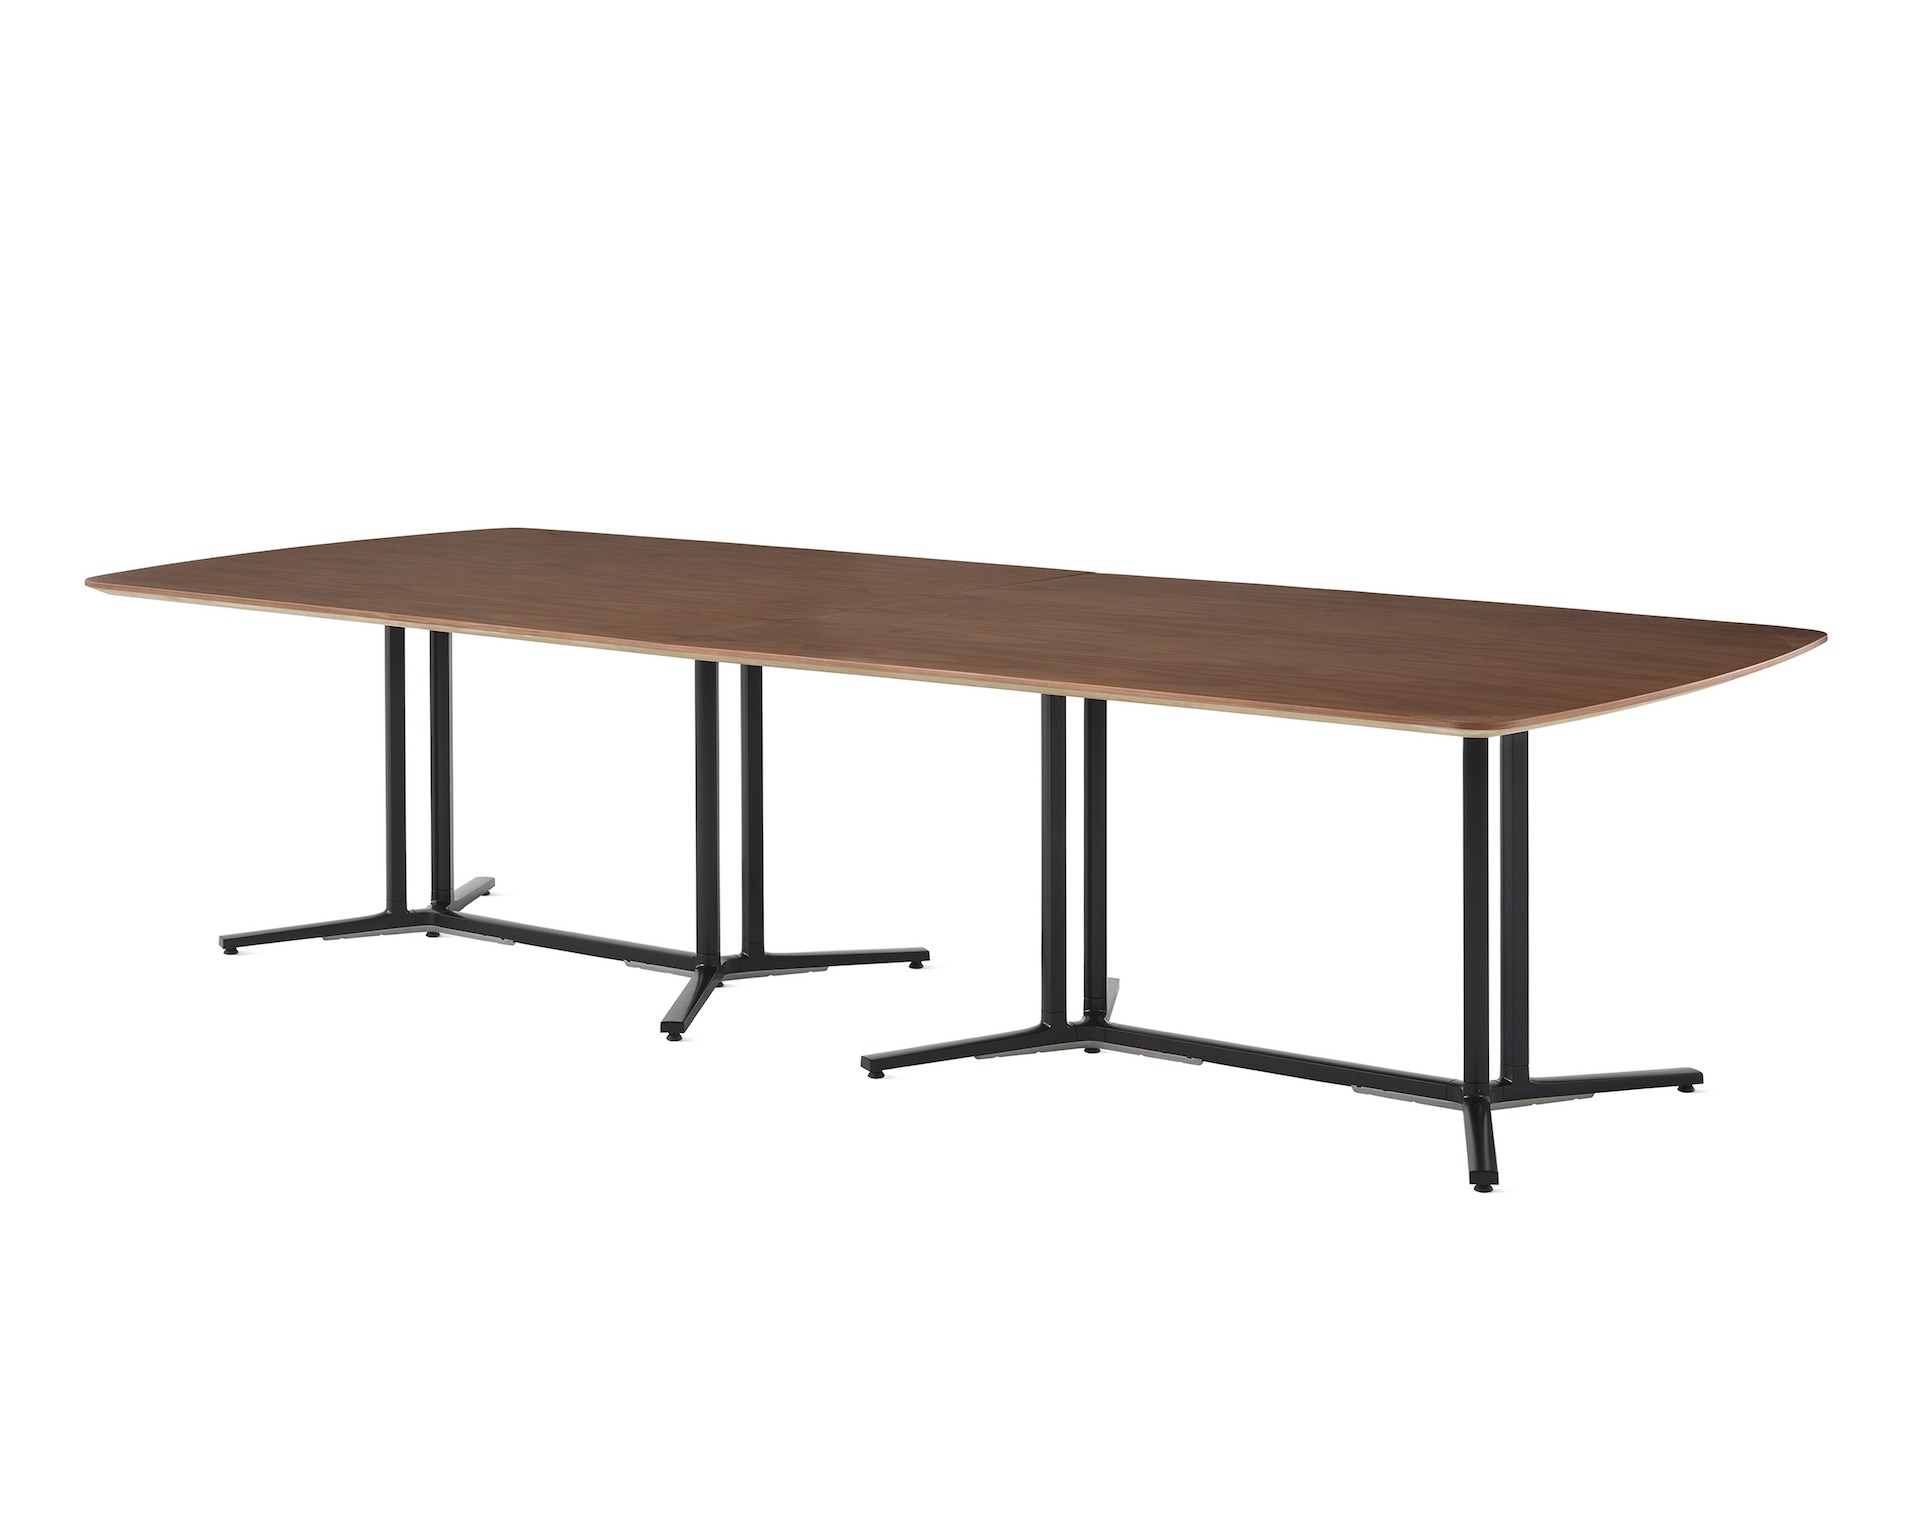 A Everywhere conference table with a walnut top and black legs. 